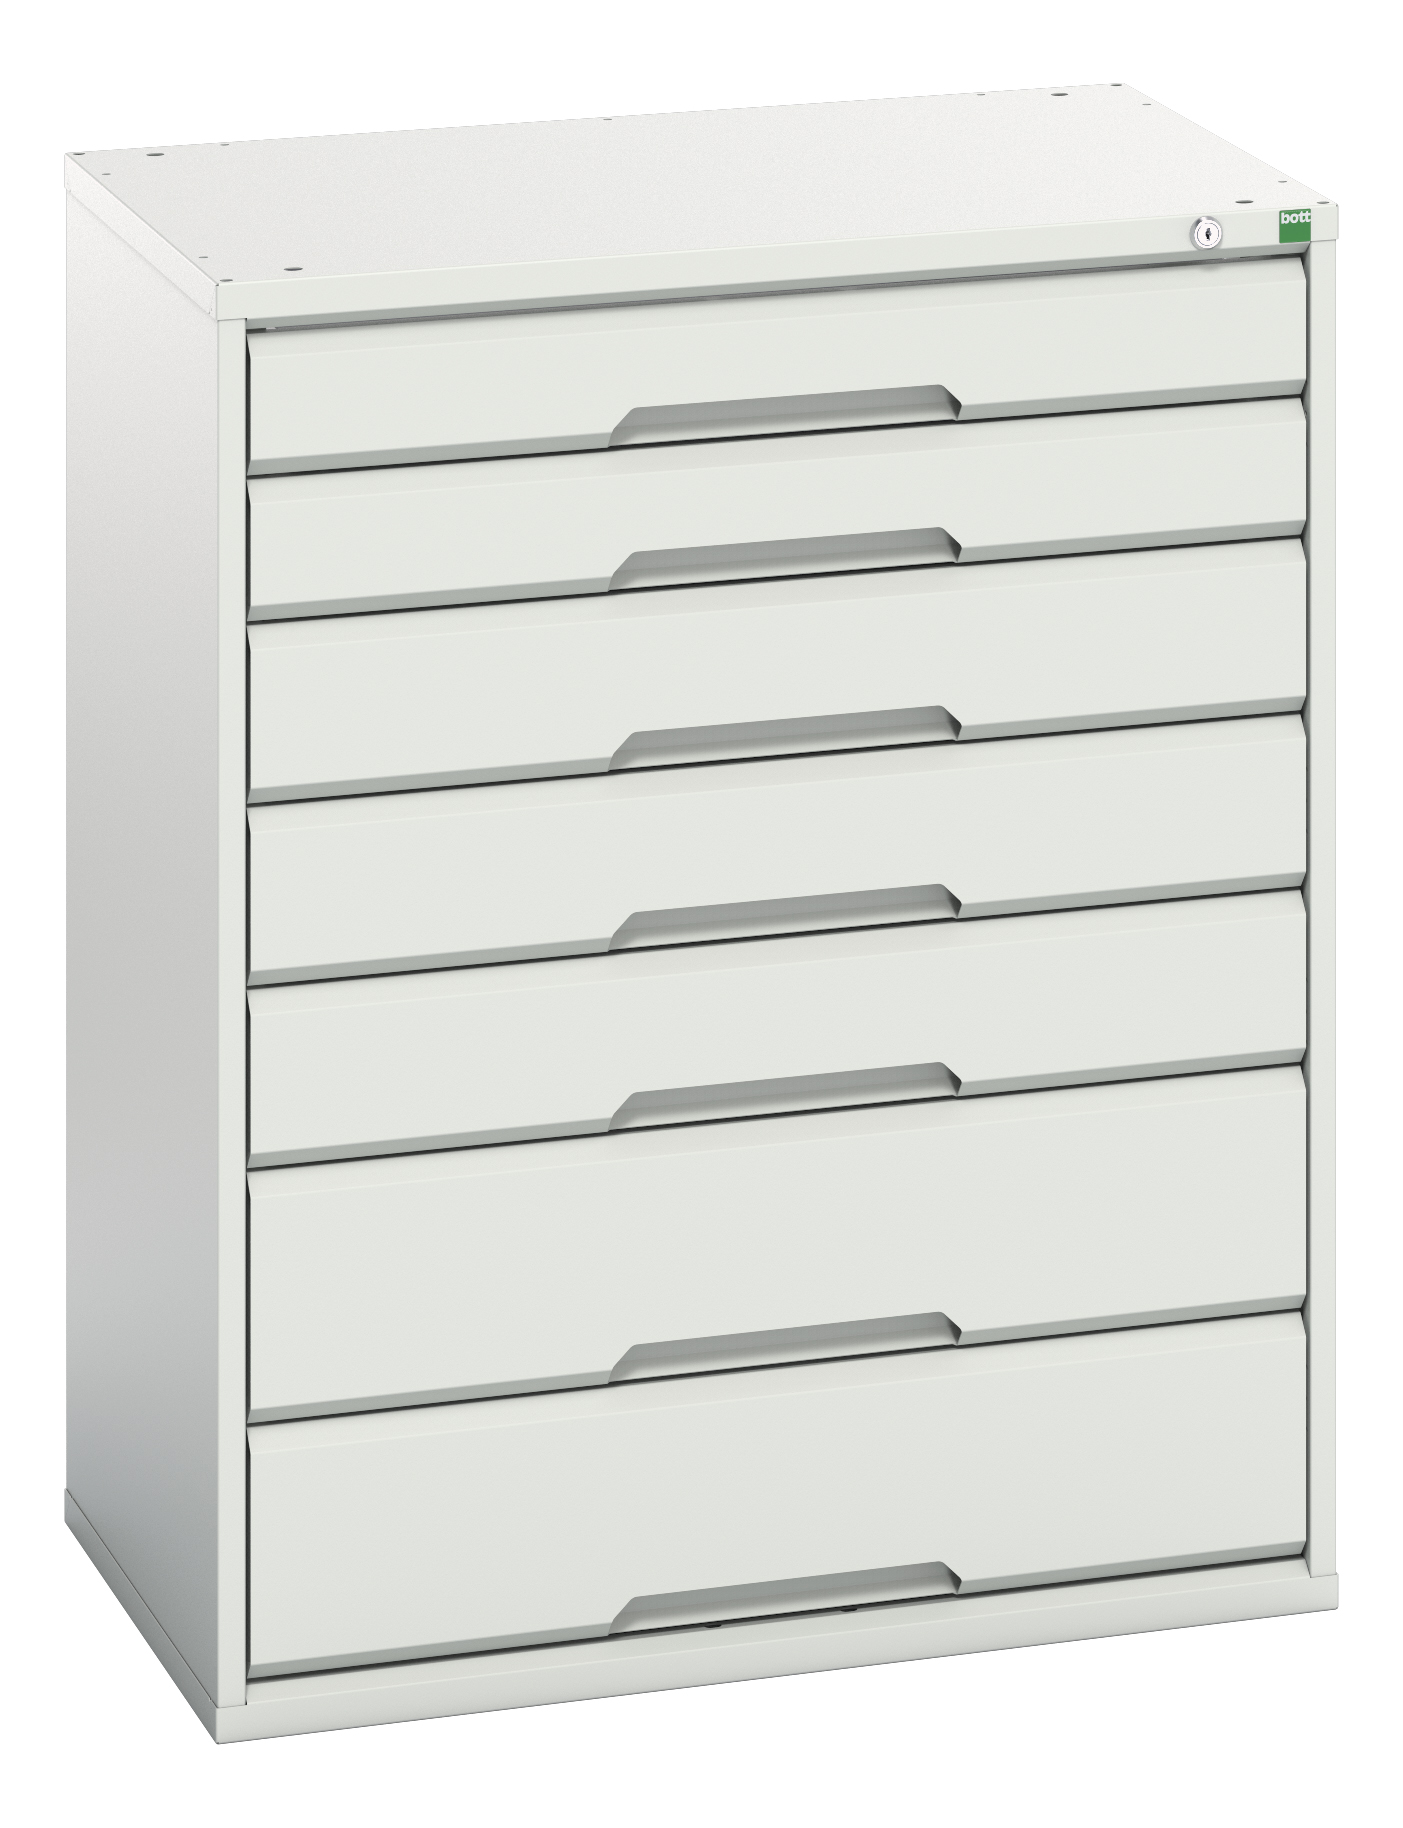 Bott Verso Drawer Cabinet With 7 Drawers - 16925149.16